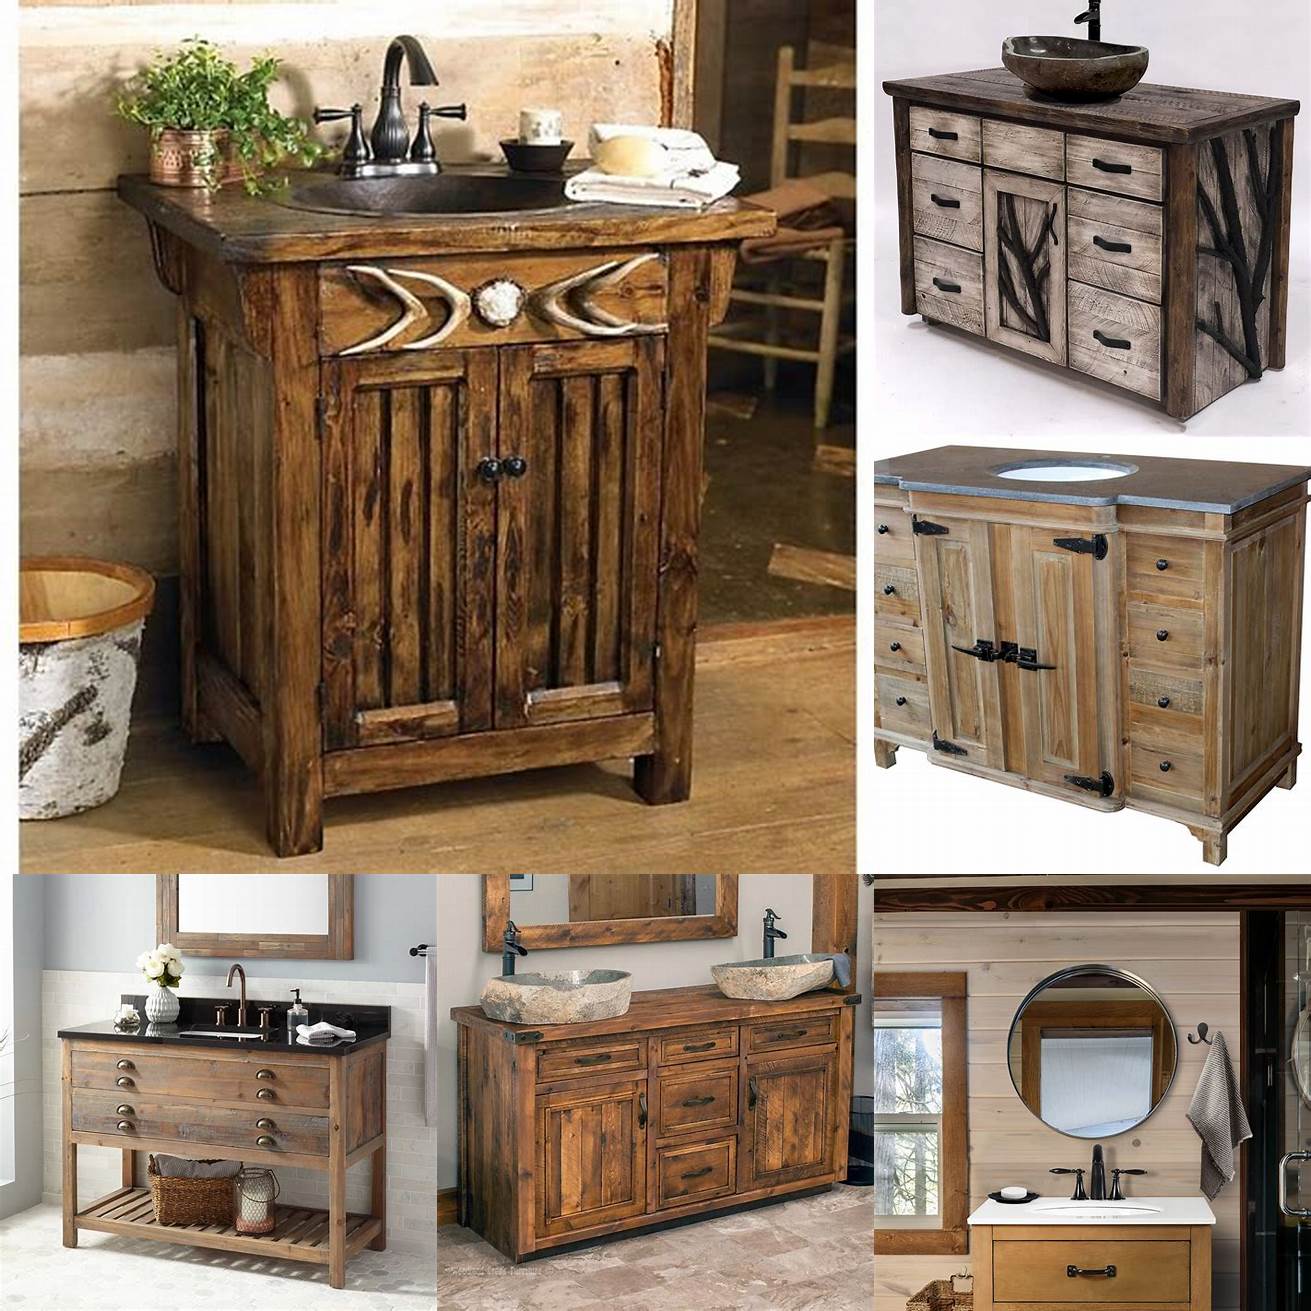 A rustic guest bathroom vanity with natural materials and a distressed finish